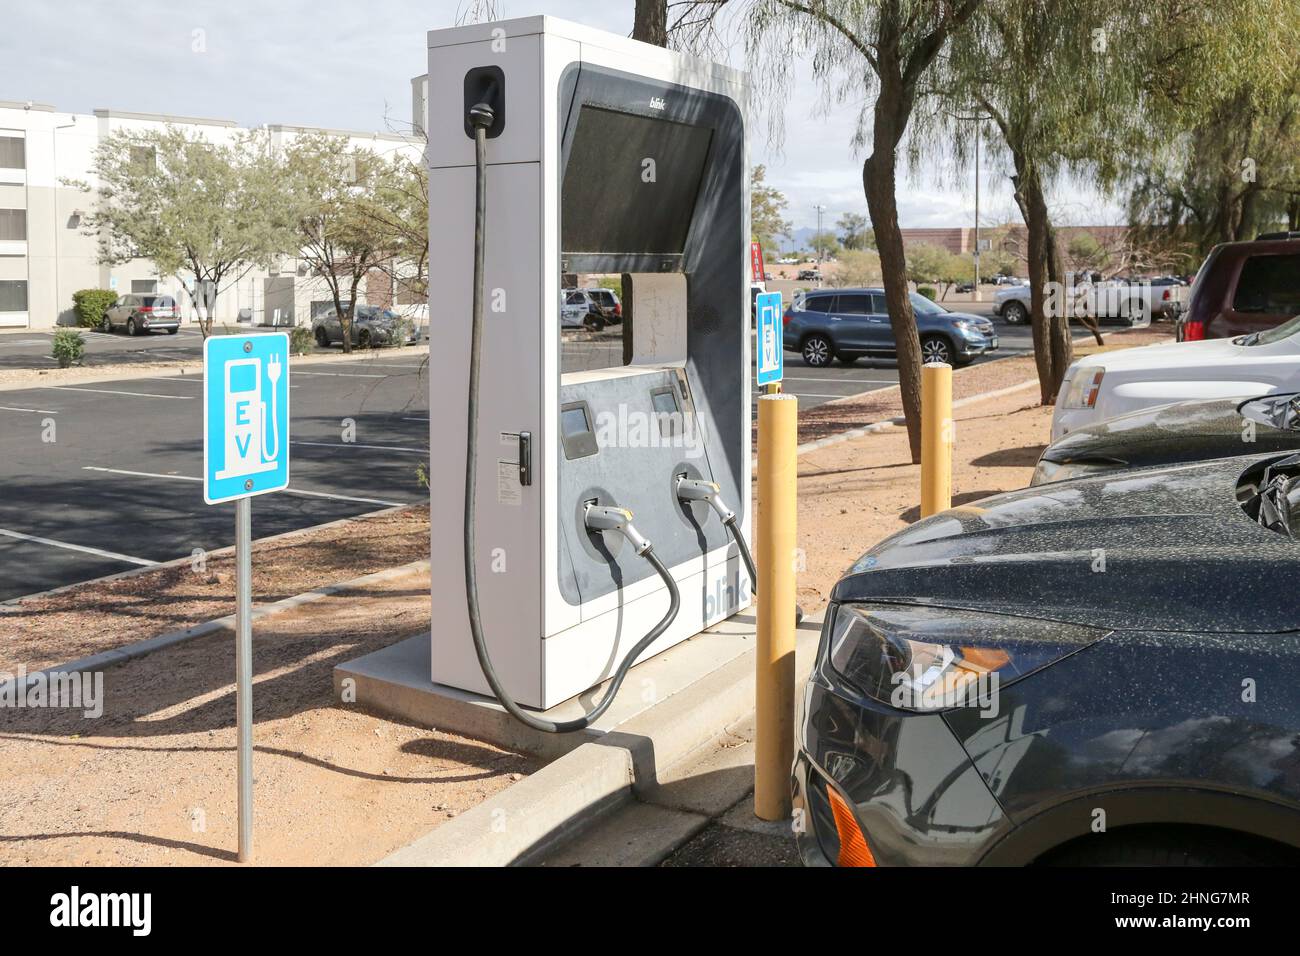 Mesa, USA. 16th Feb, 2022. A Blink charging station is located at a